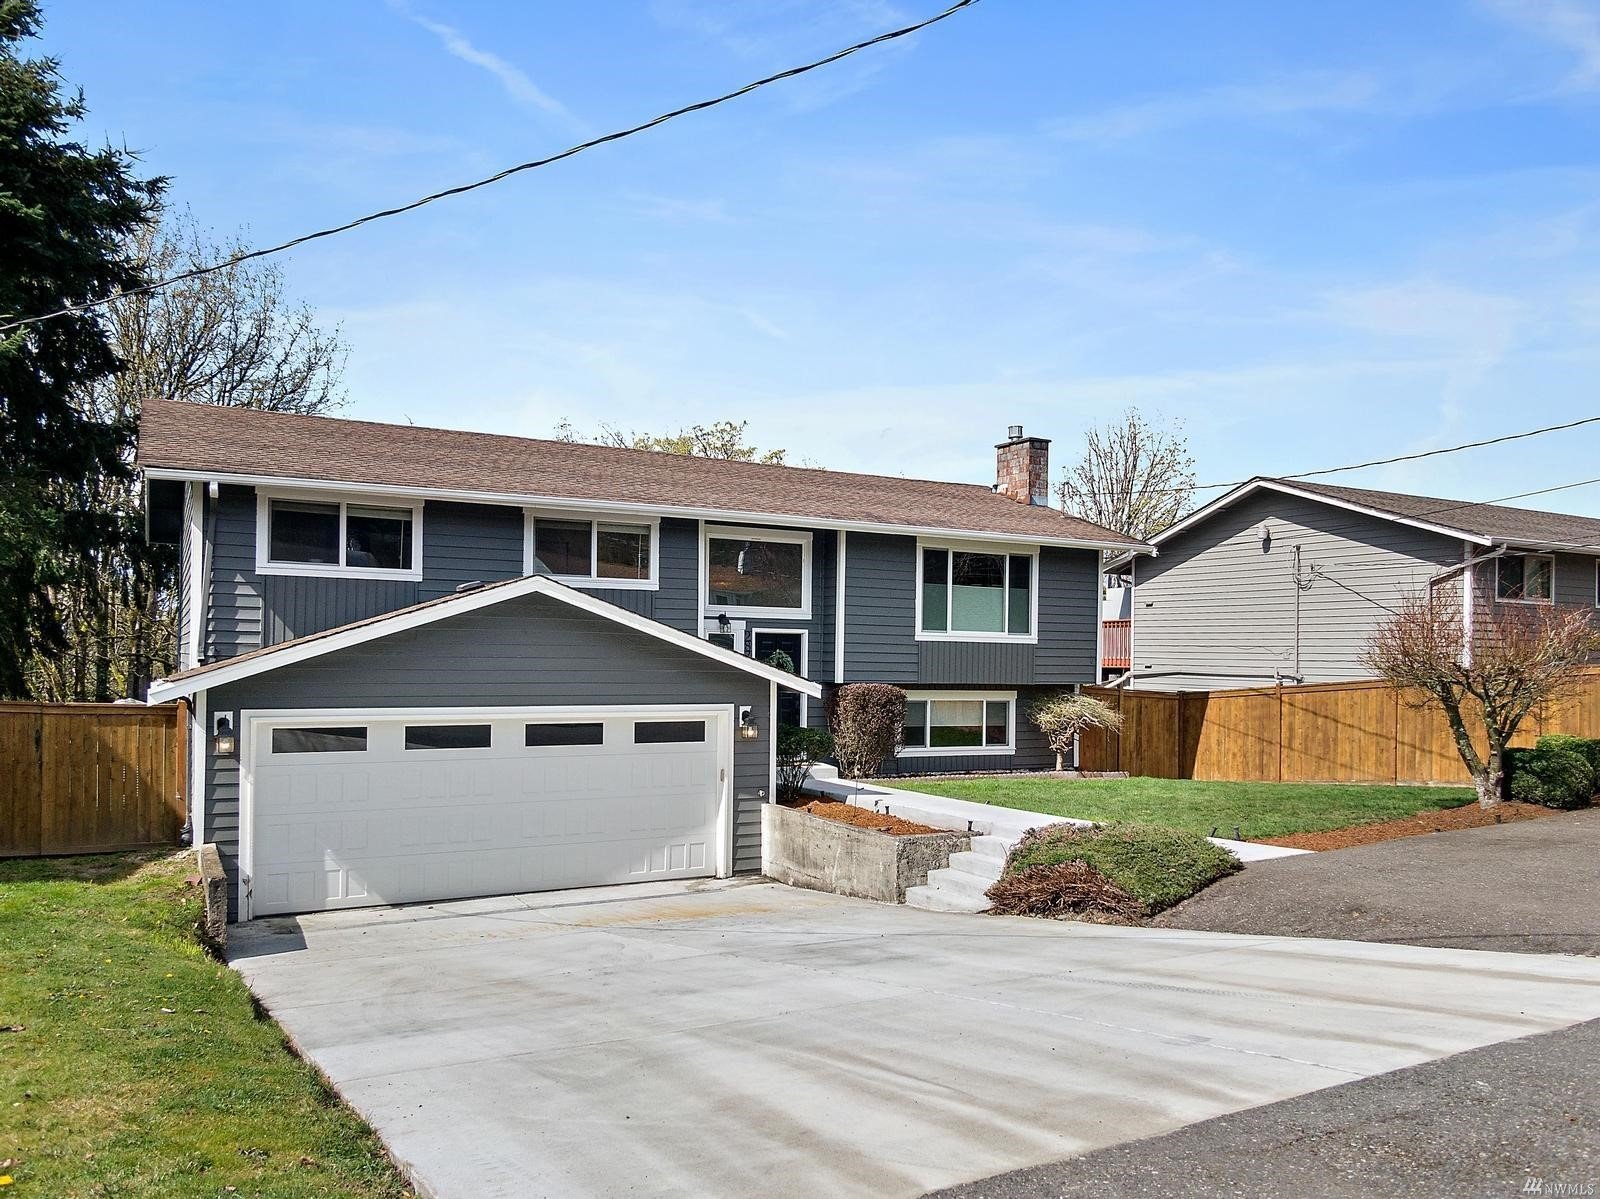 28713 13th AVENUE S, FEDERAL WAY | SOLD AT $805,000